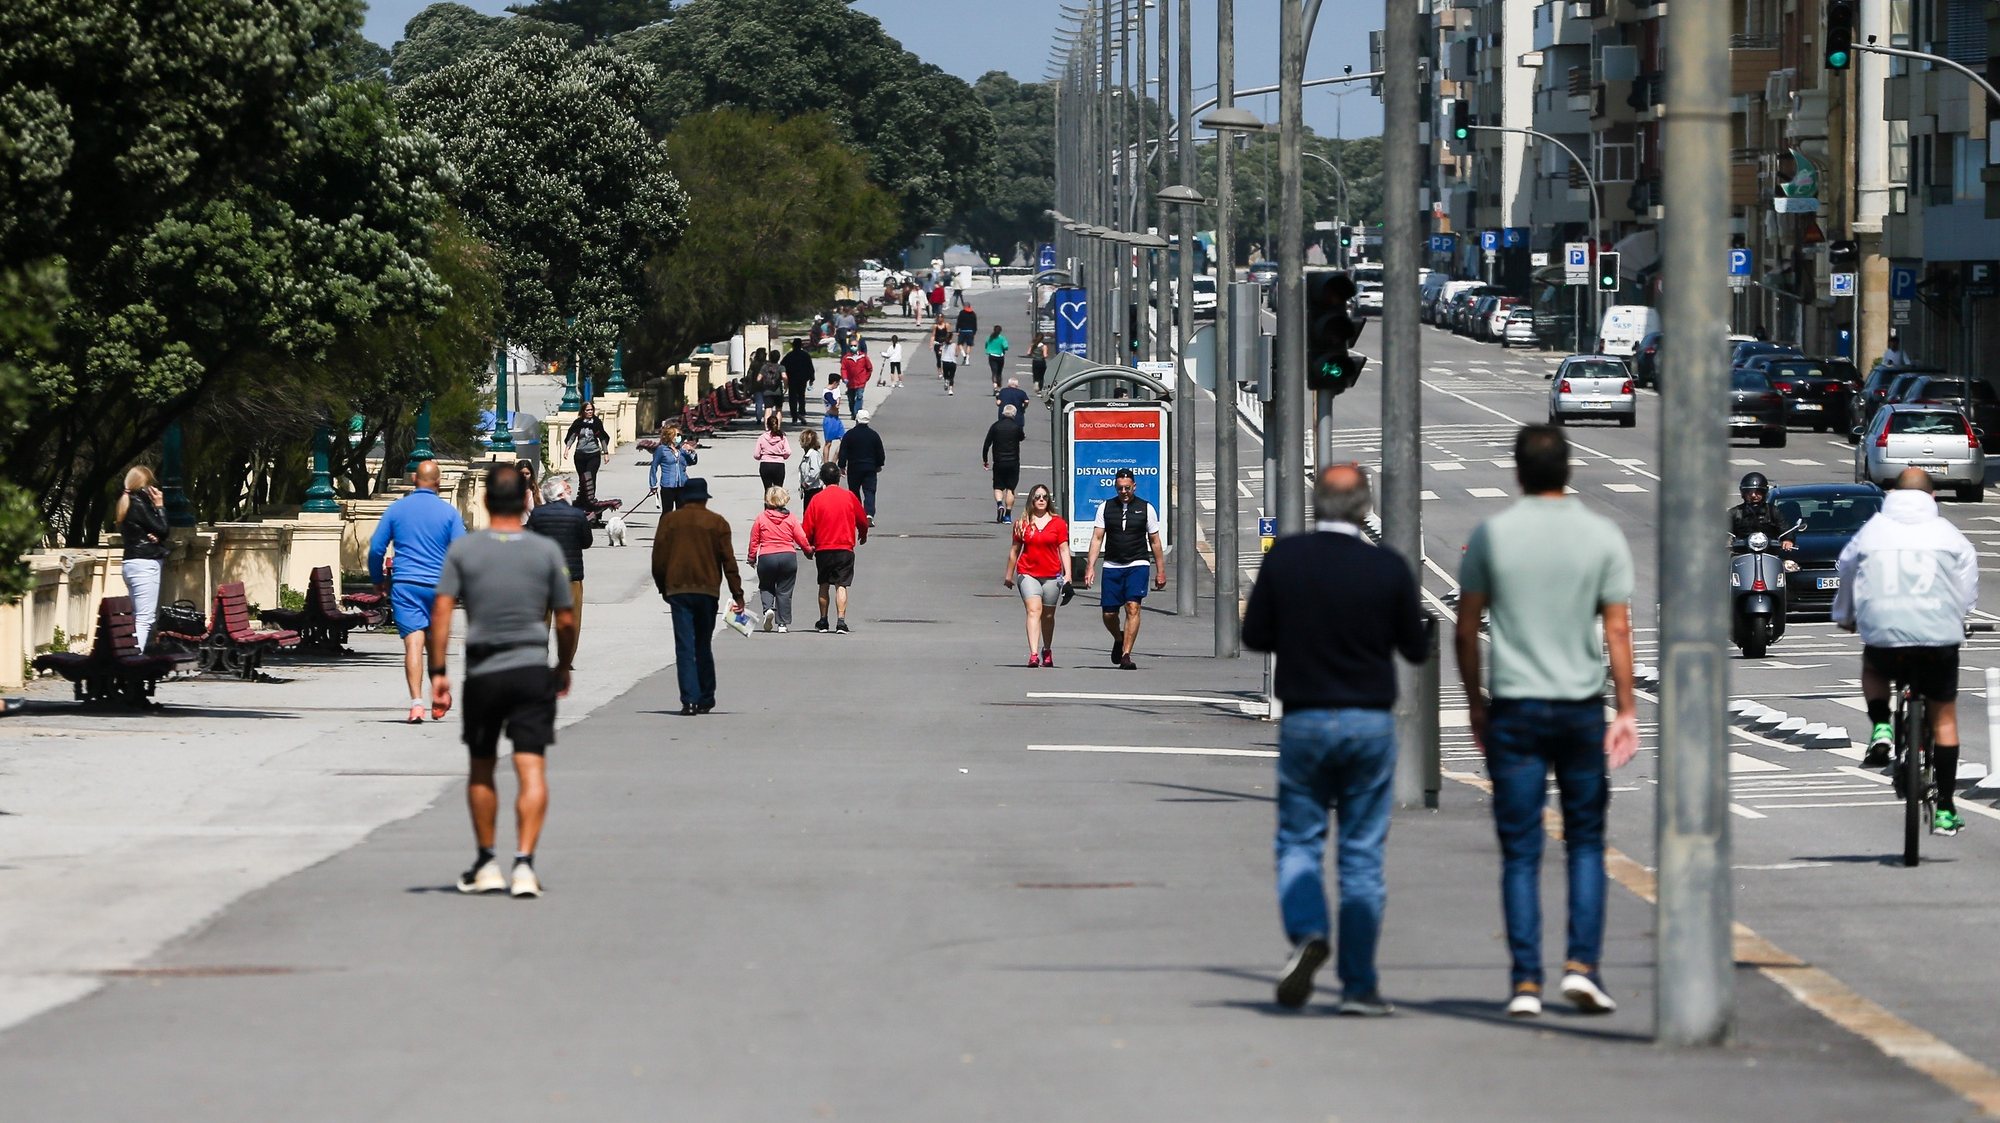 People walk Brasil avenue in Porto, northern Portugal, 23 April, 2020. Portugal is in a state of emergency since 00:00 h on 26 March until 23:59 May 2. Countries around the world are taking increased measures to stem the widespread of the SARS-CoV-2 coronavirus which causes the Covid-19 disease. JOSE COELHO/LUSA